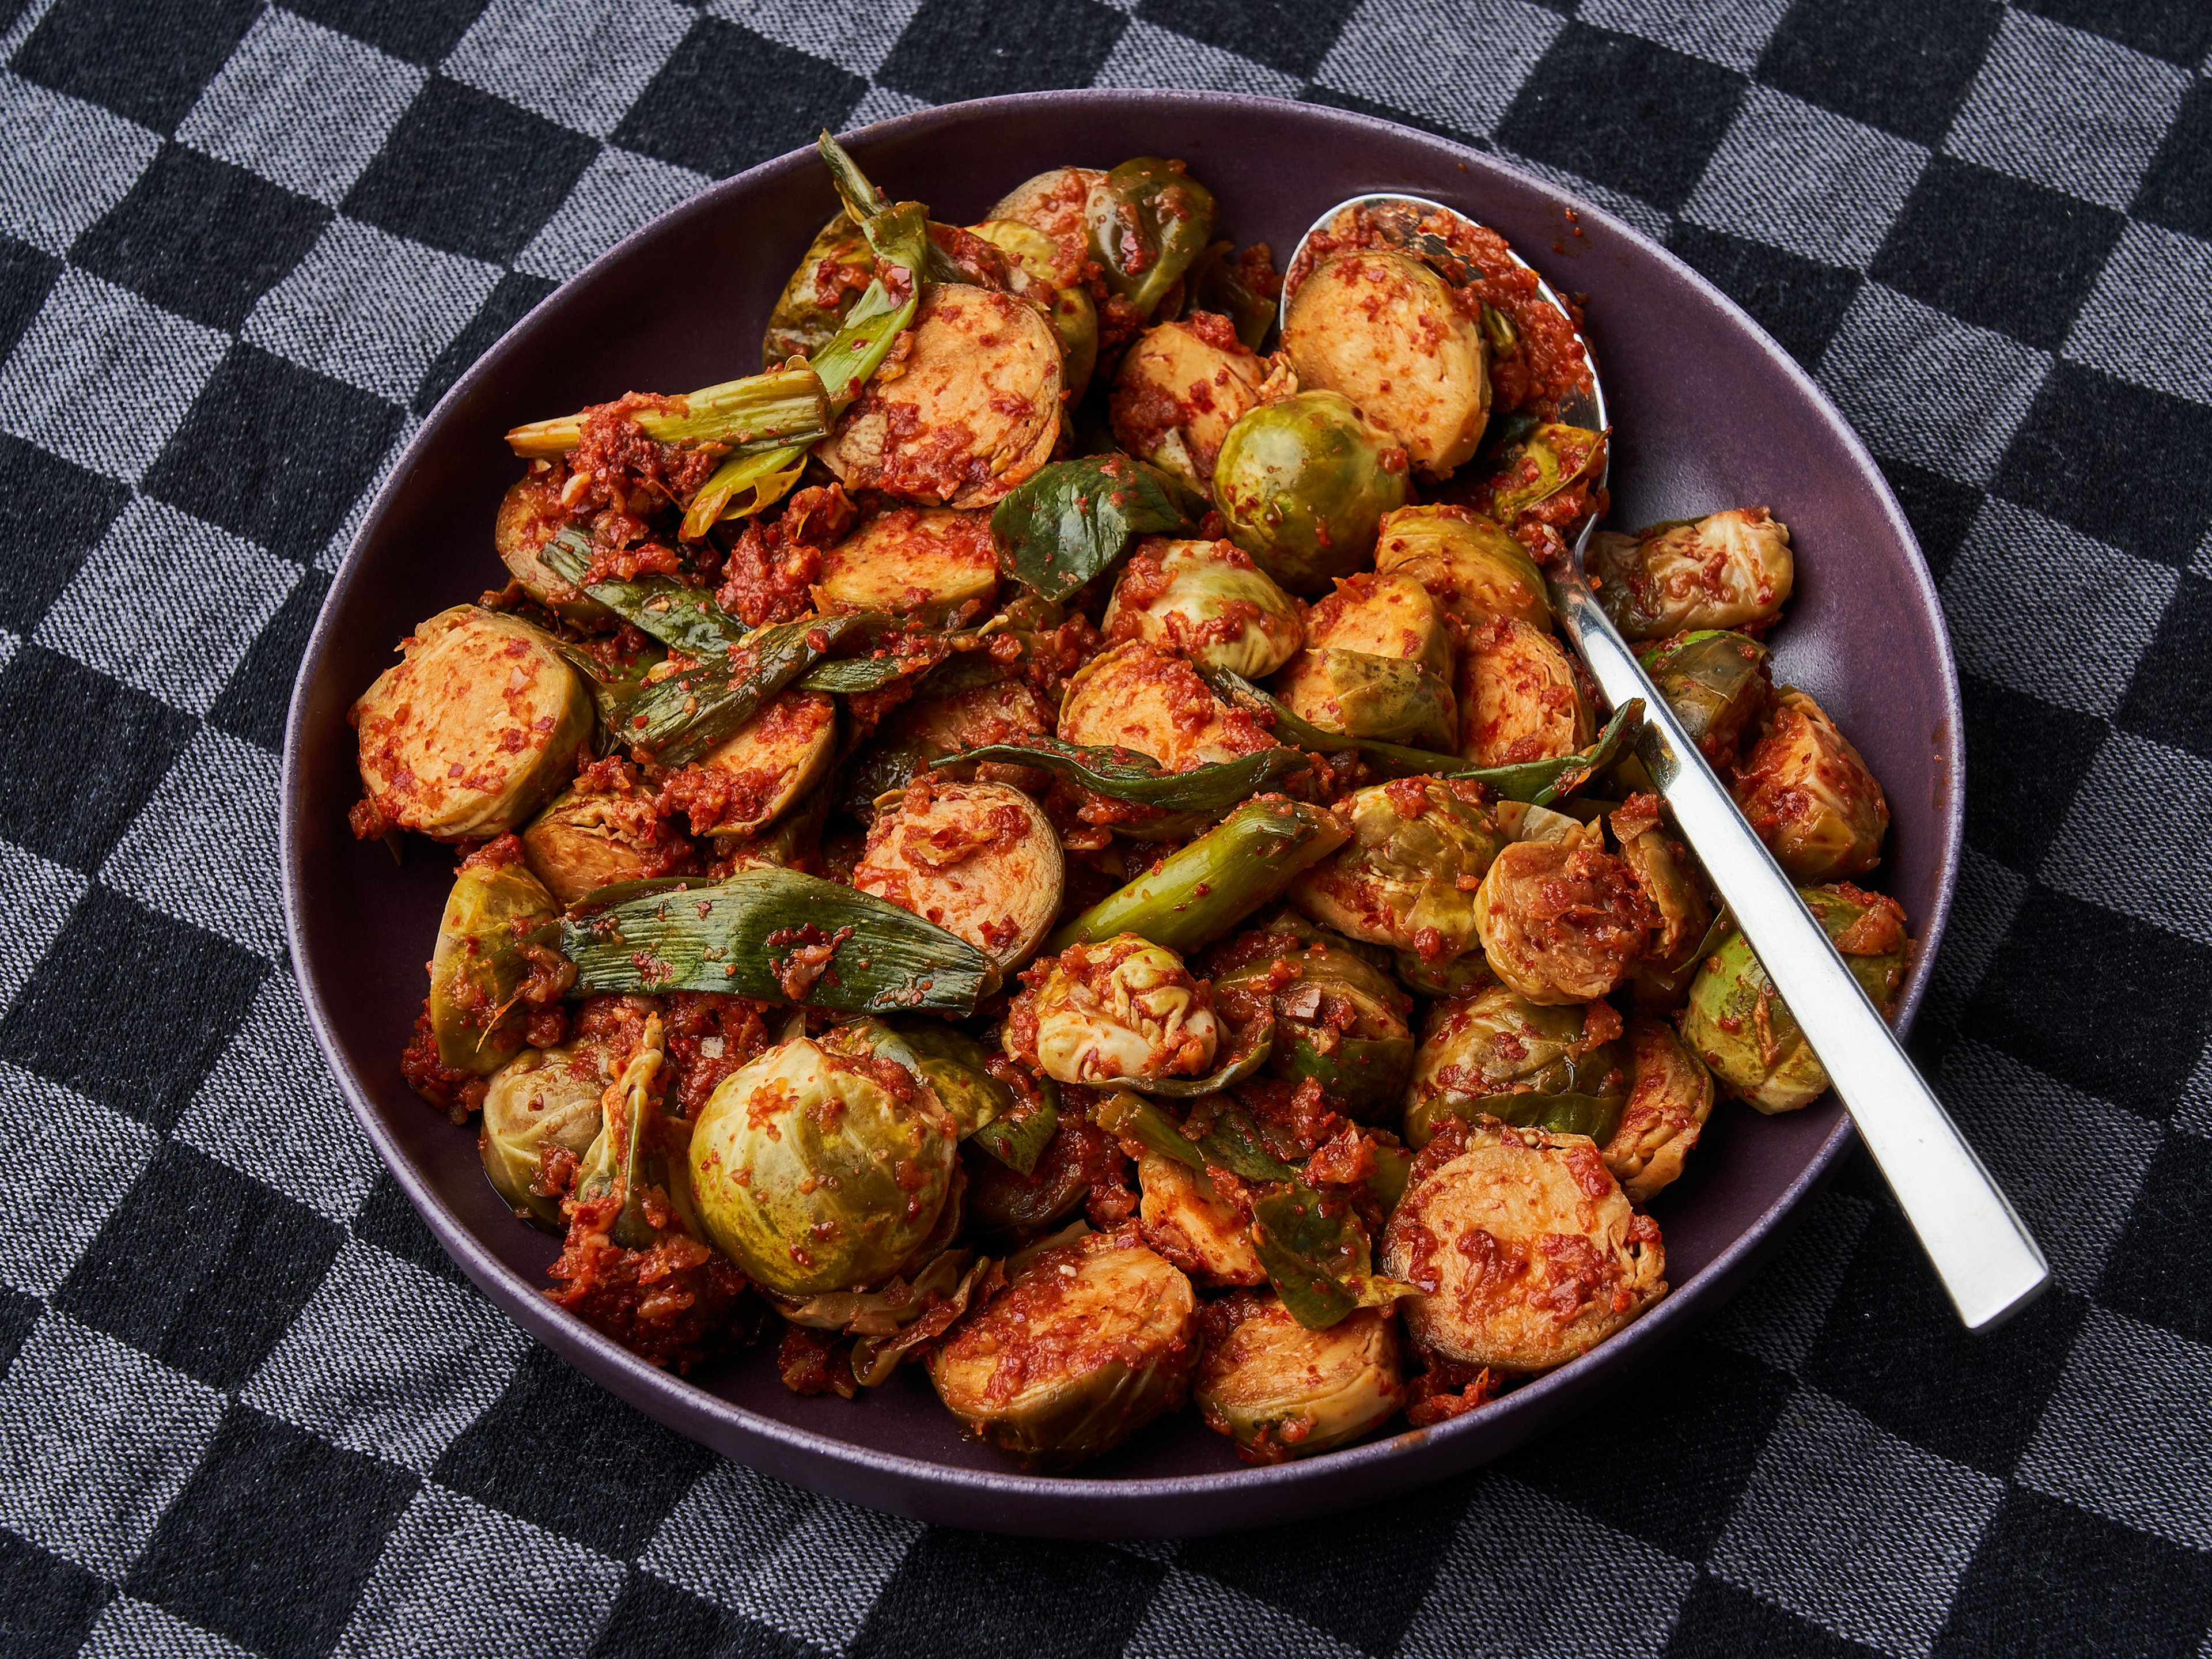 Brussels sprout kimchi